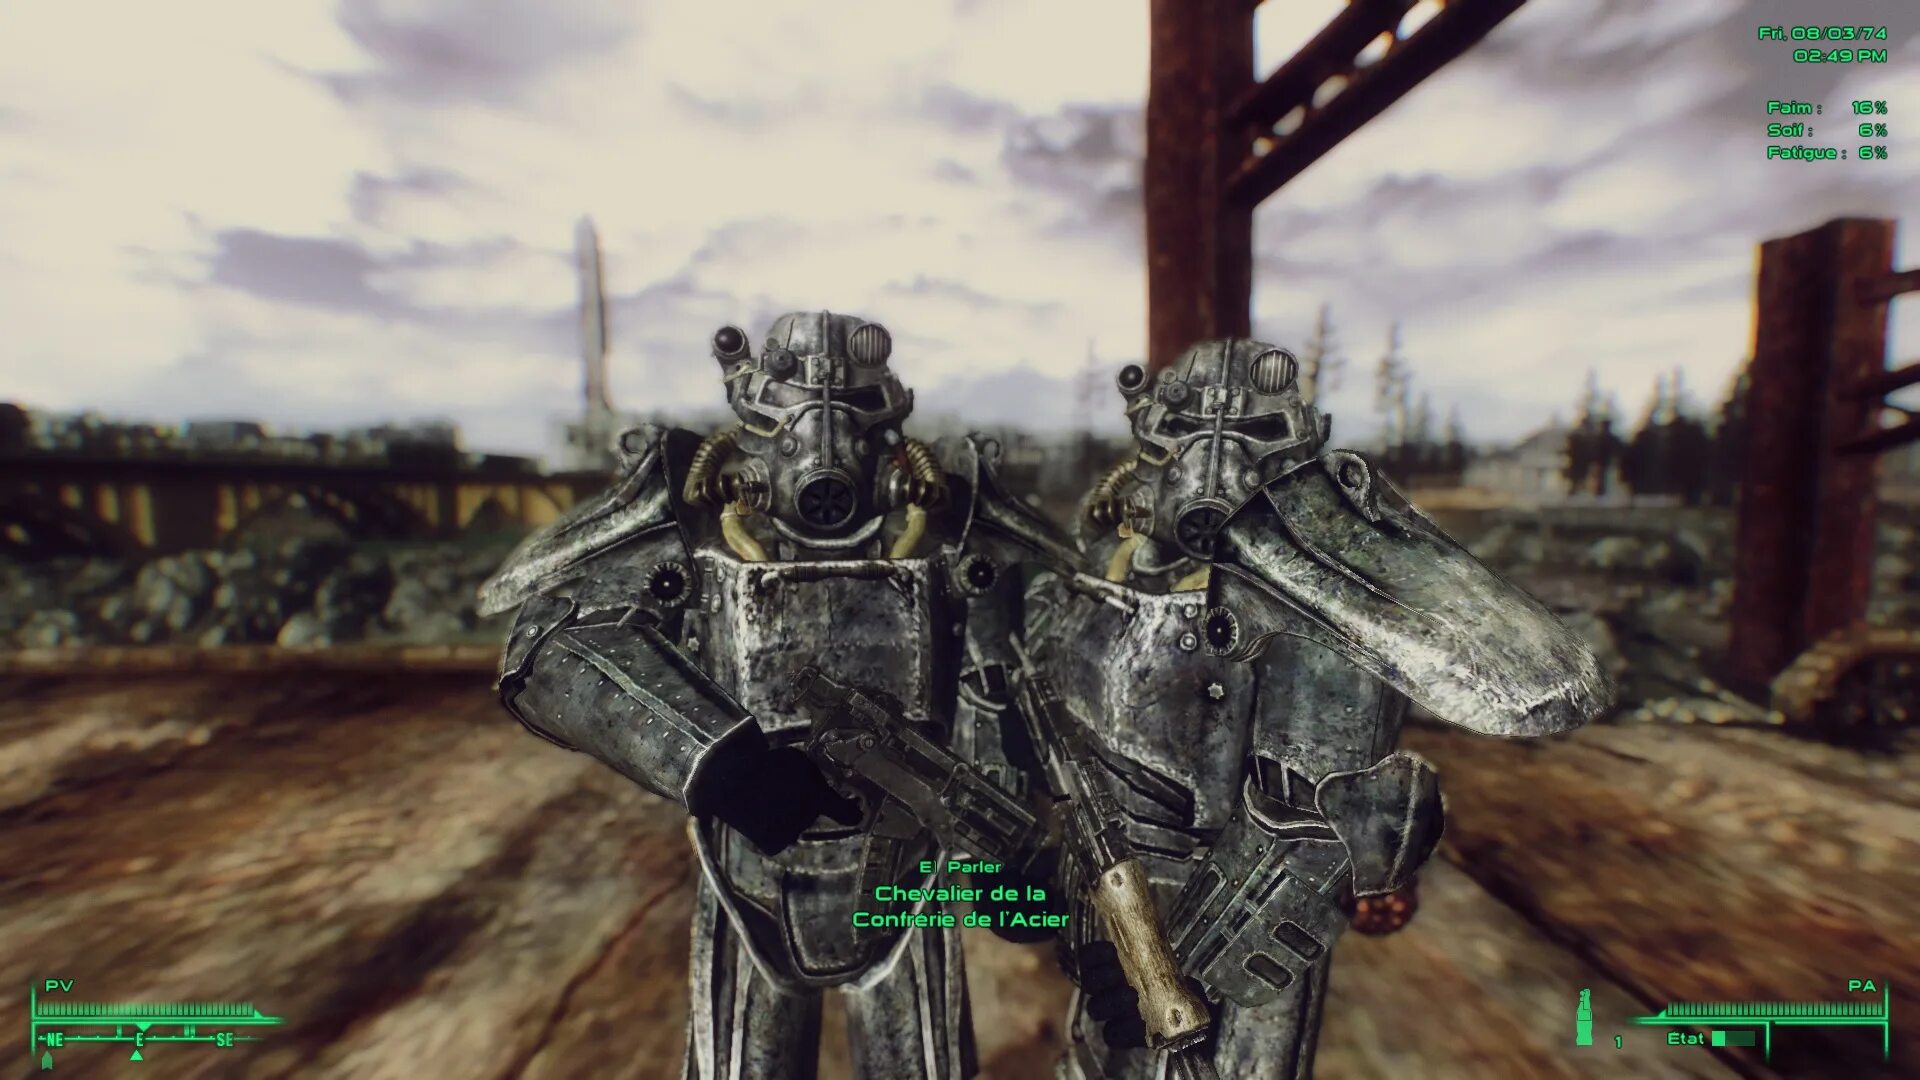 Fallout 3 ремастер. Fallout 3 Remastered. Fallout 3 Mods. Сколько весит фоллаут